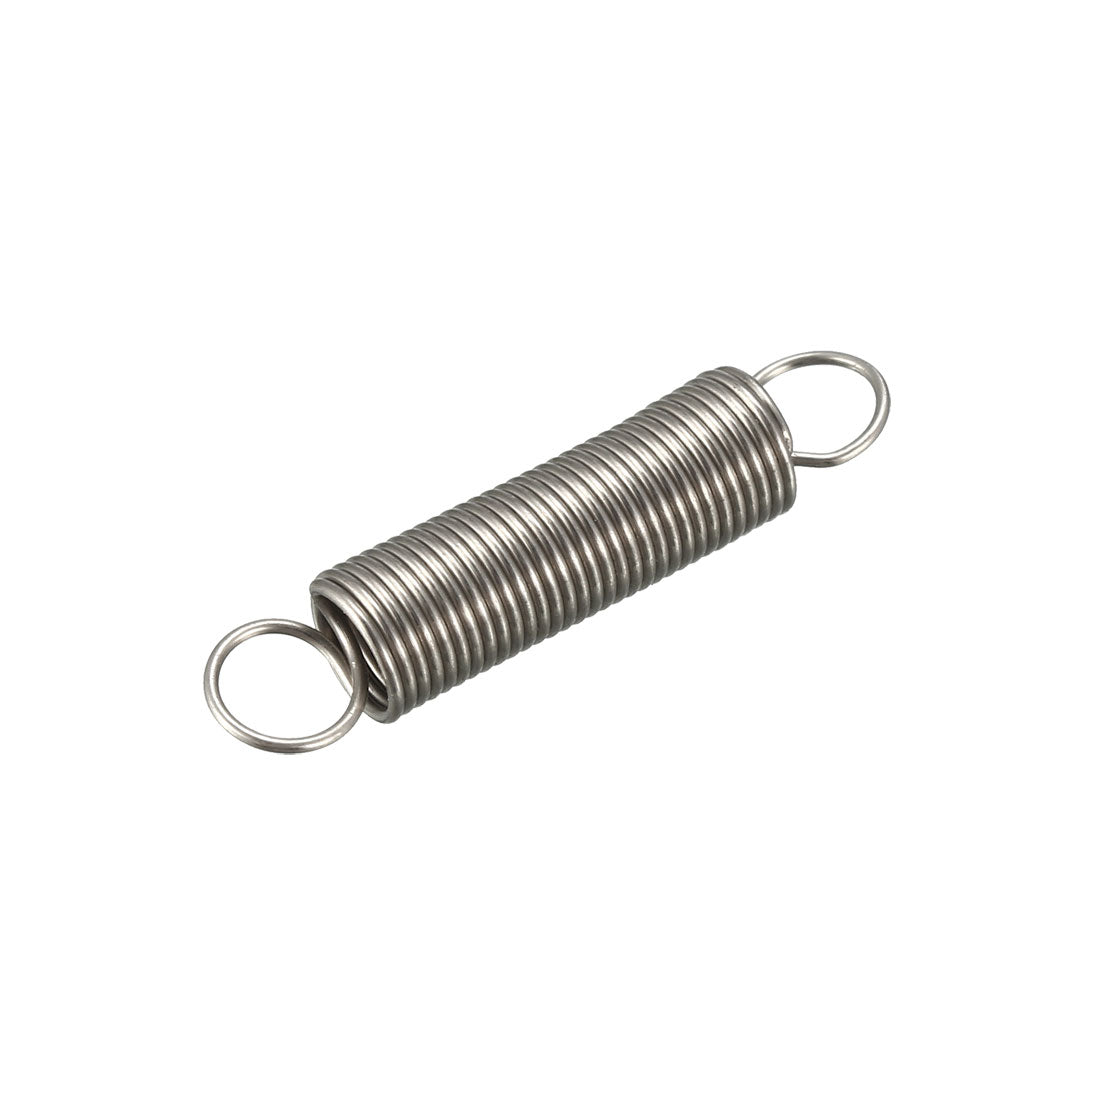 uxcell Uxcell Extended Tension Spring Wire Diameter 0.031", OD 0.31", Free Length 2.36" 5pcs